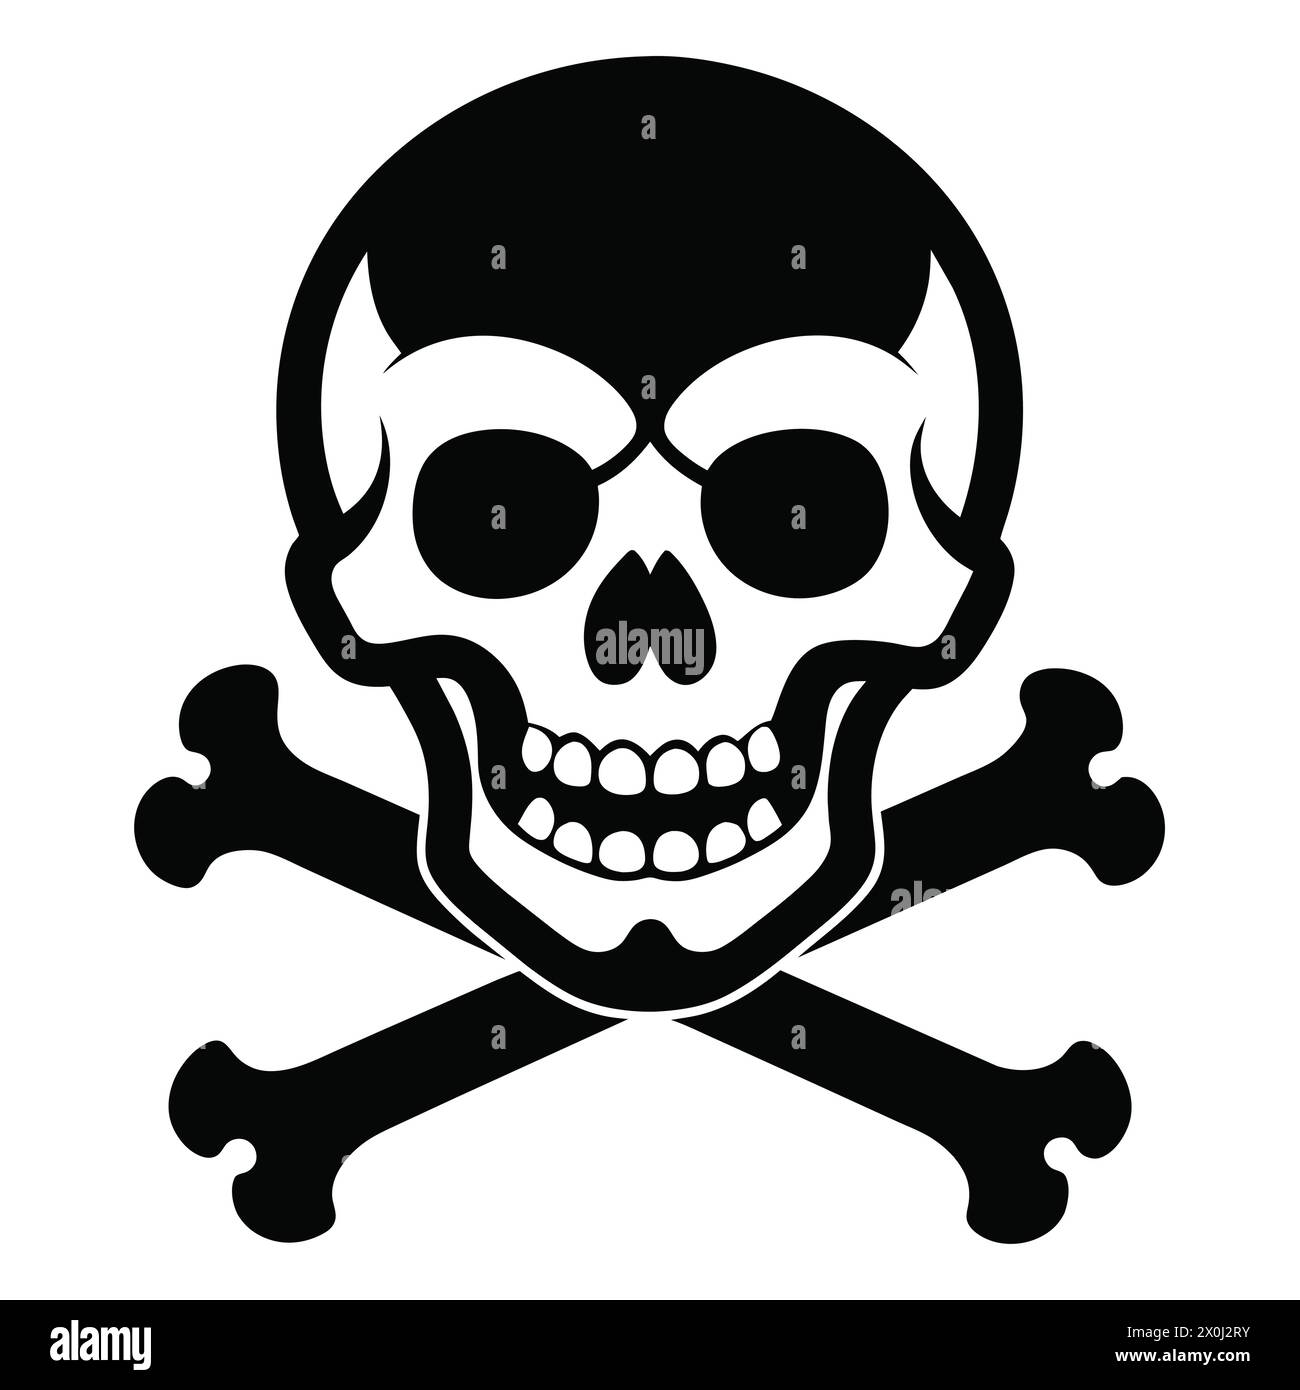 Silhouette of Skull and Bones, perfect for Halloween Decor, Party Invitations, Spooky Themed Events, Tattoo Designs, Gothic Art Prints Stock Vector